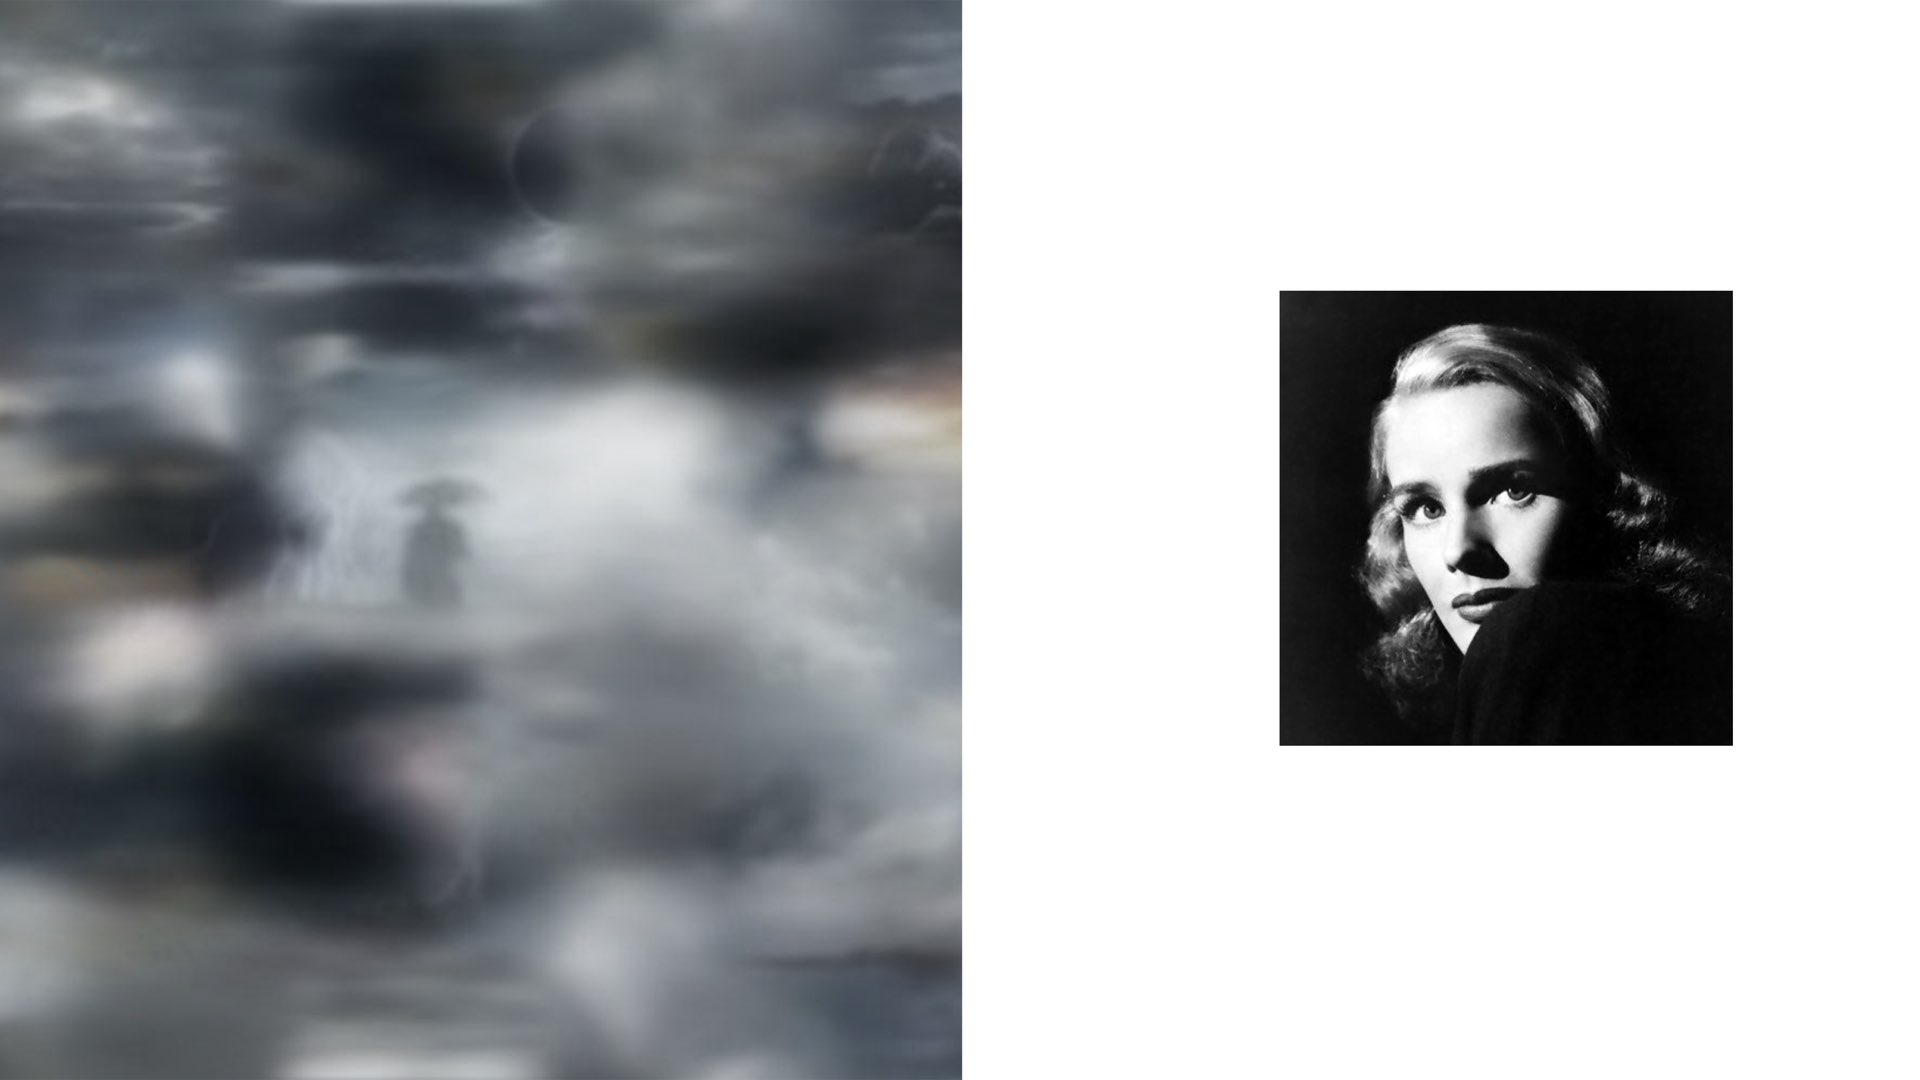 Artist Maja Petrić used machine learning algorithms to create this cloudy sky graphic, shown alongside a black/white glamour portrait of woman